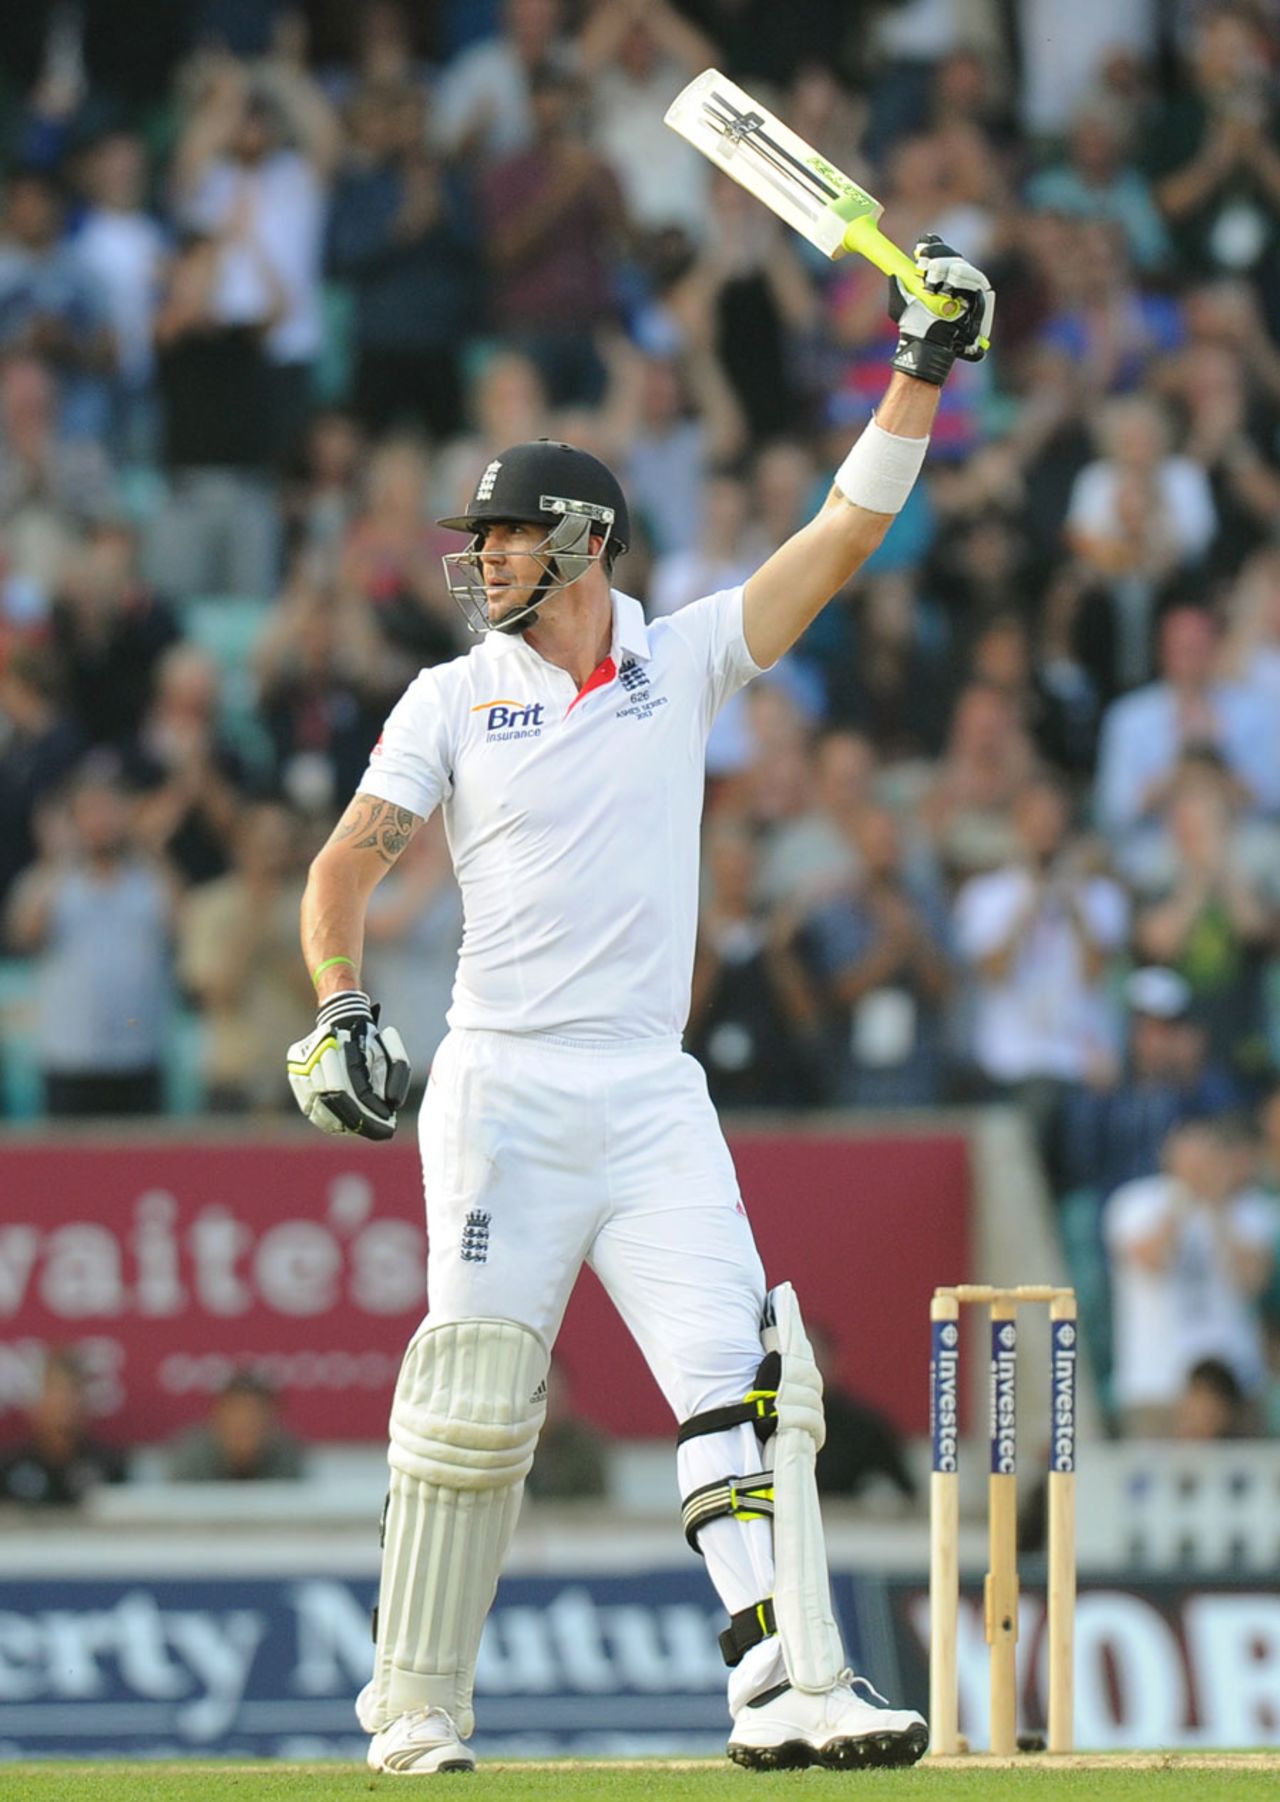 Kevin Pietersen raises his bat after making a half-century, England v Australia, 5th Investec Test, The Oval, 5th day, August 25, 2013